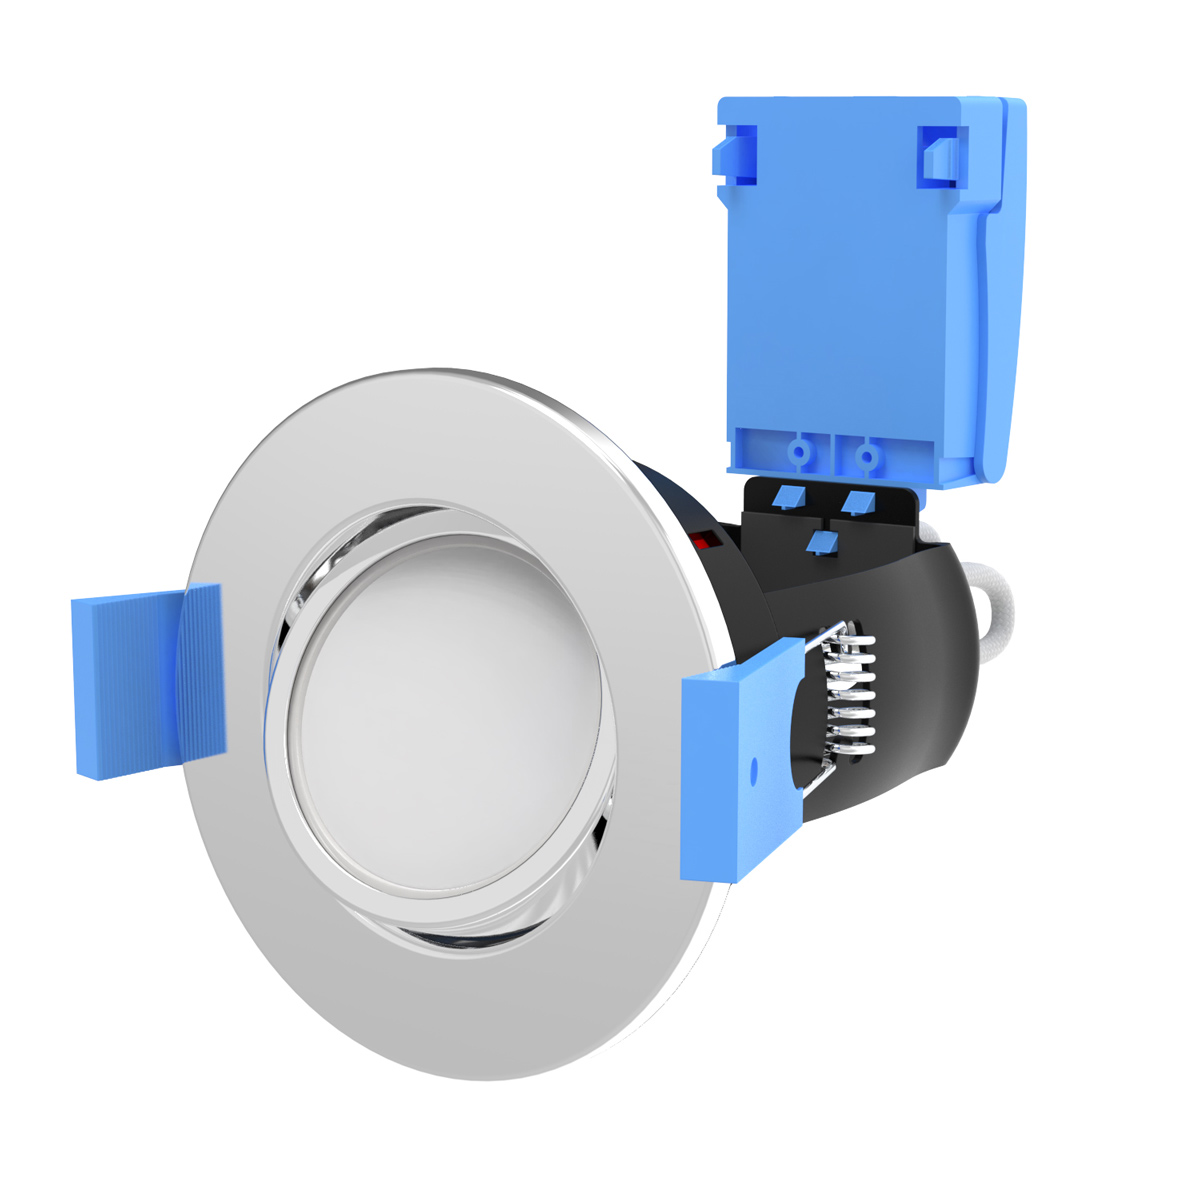 View DieCast Tilt Fire Rated Downlight GU10 Twist and Lock Chrome Finish information